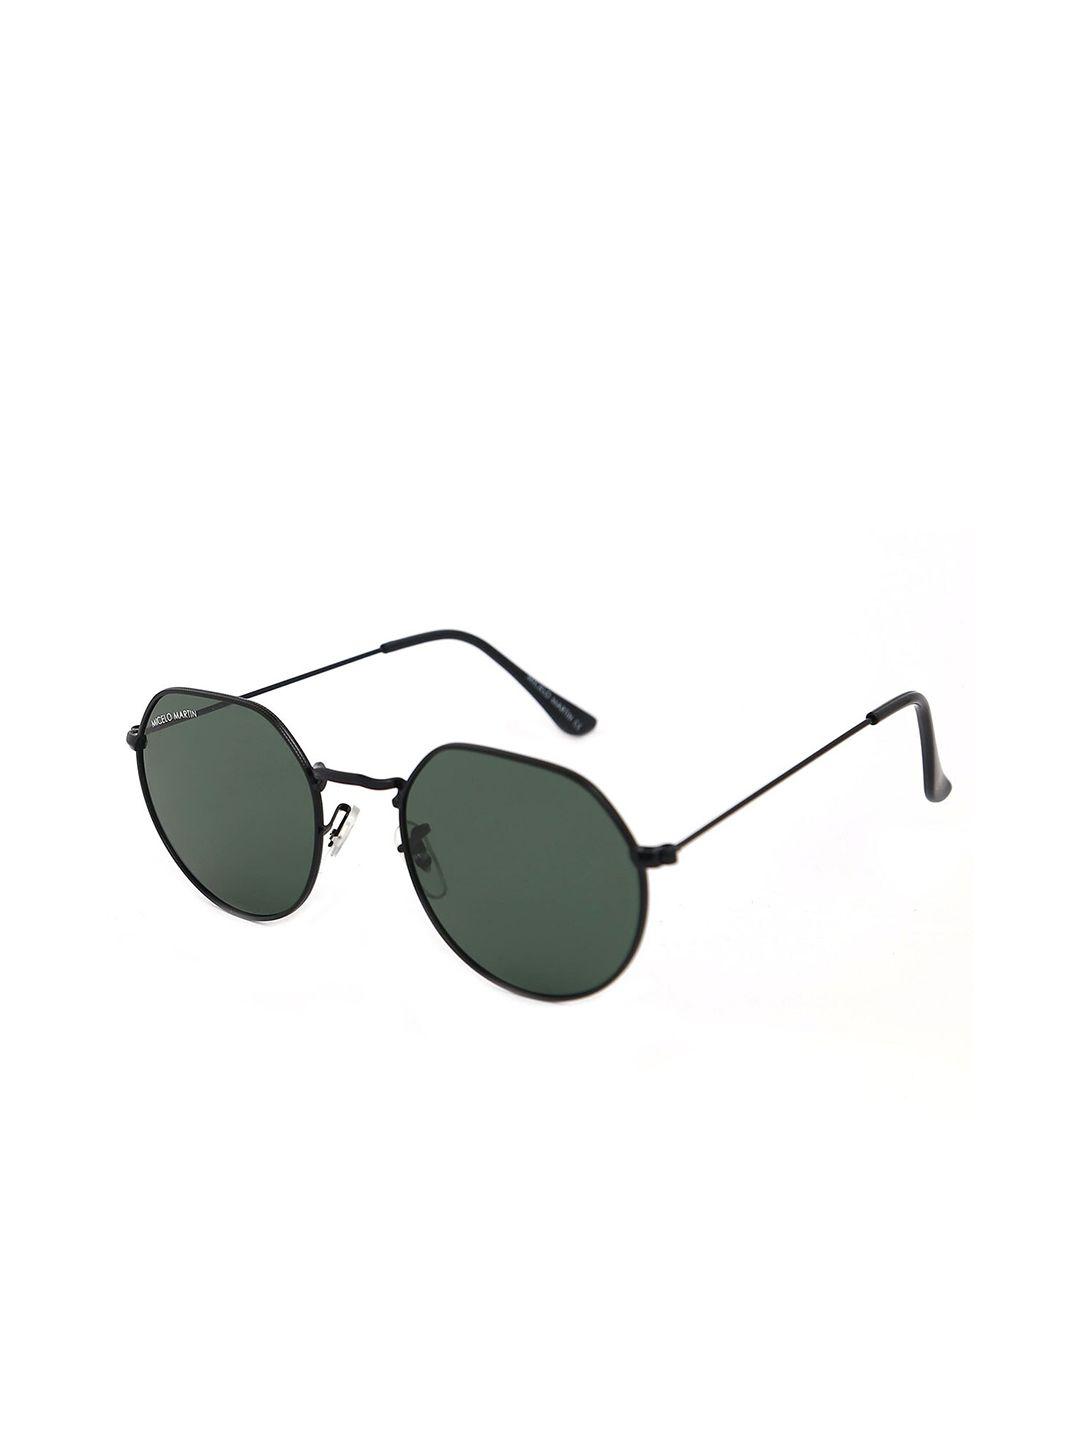 micelo martin unisex green lens & black round sunglasses with uv protected lens